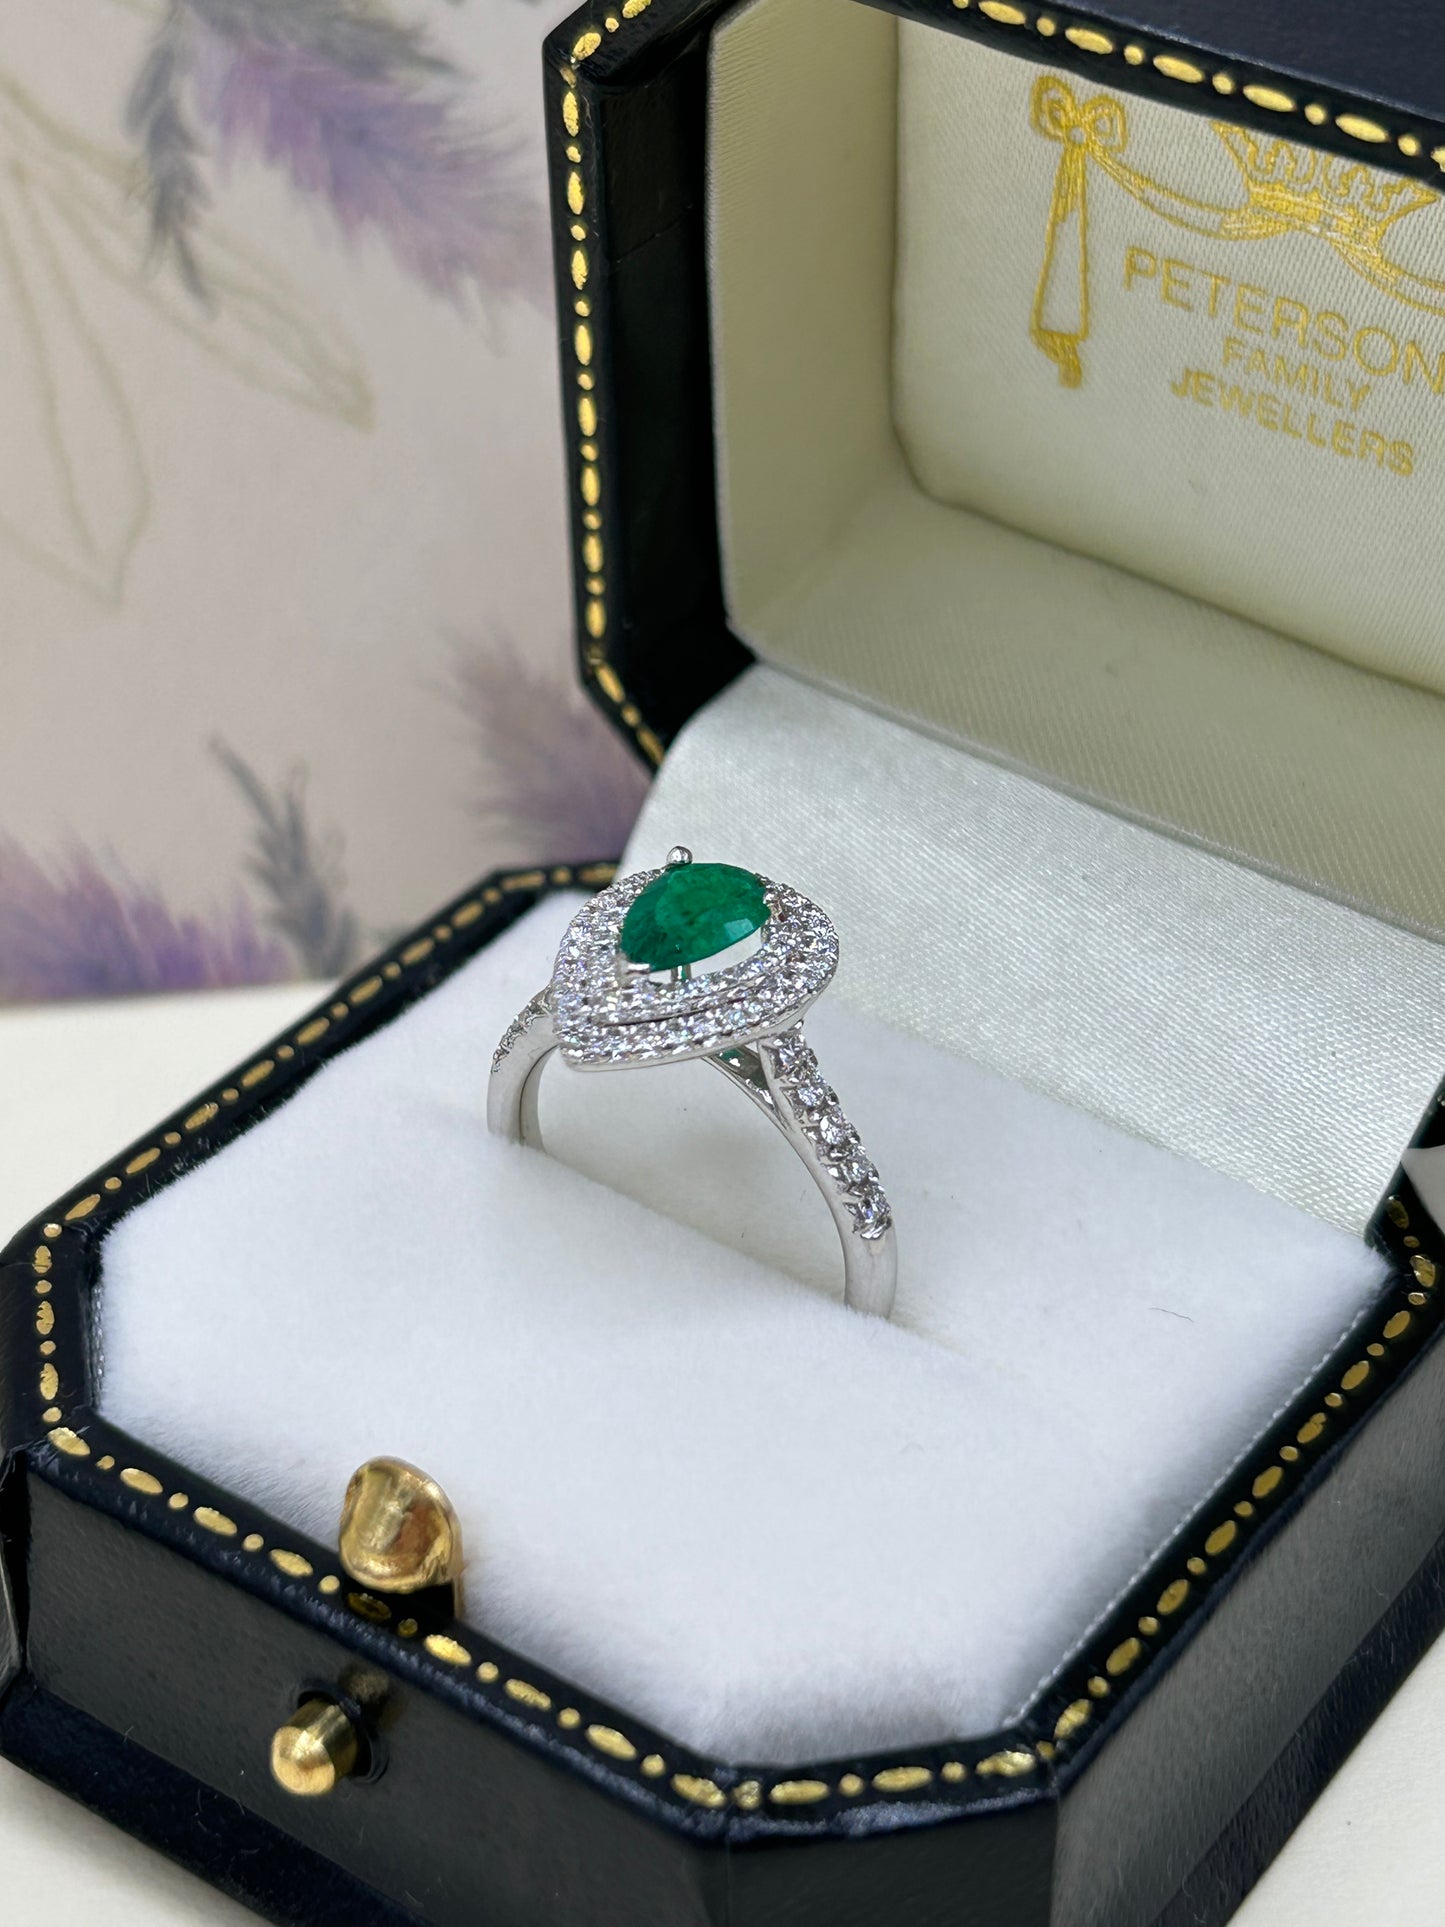 18ct White Gold Emerald and Diamond Cluster Ring